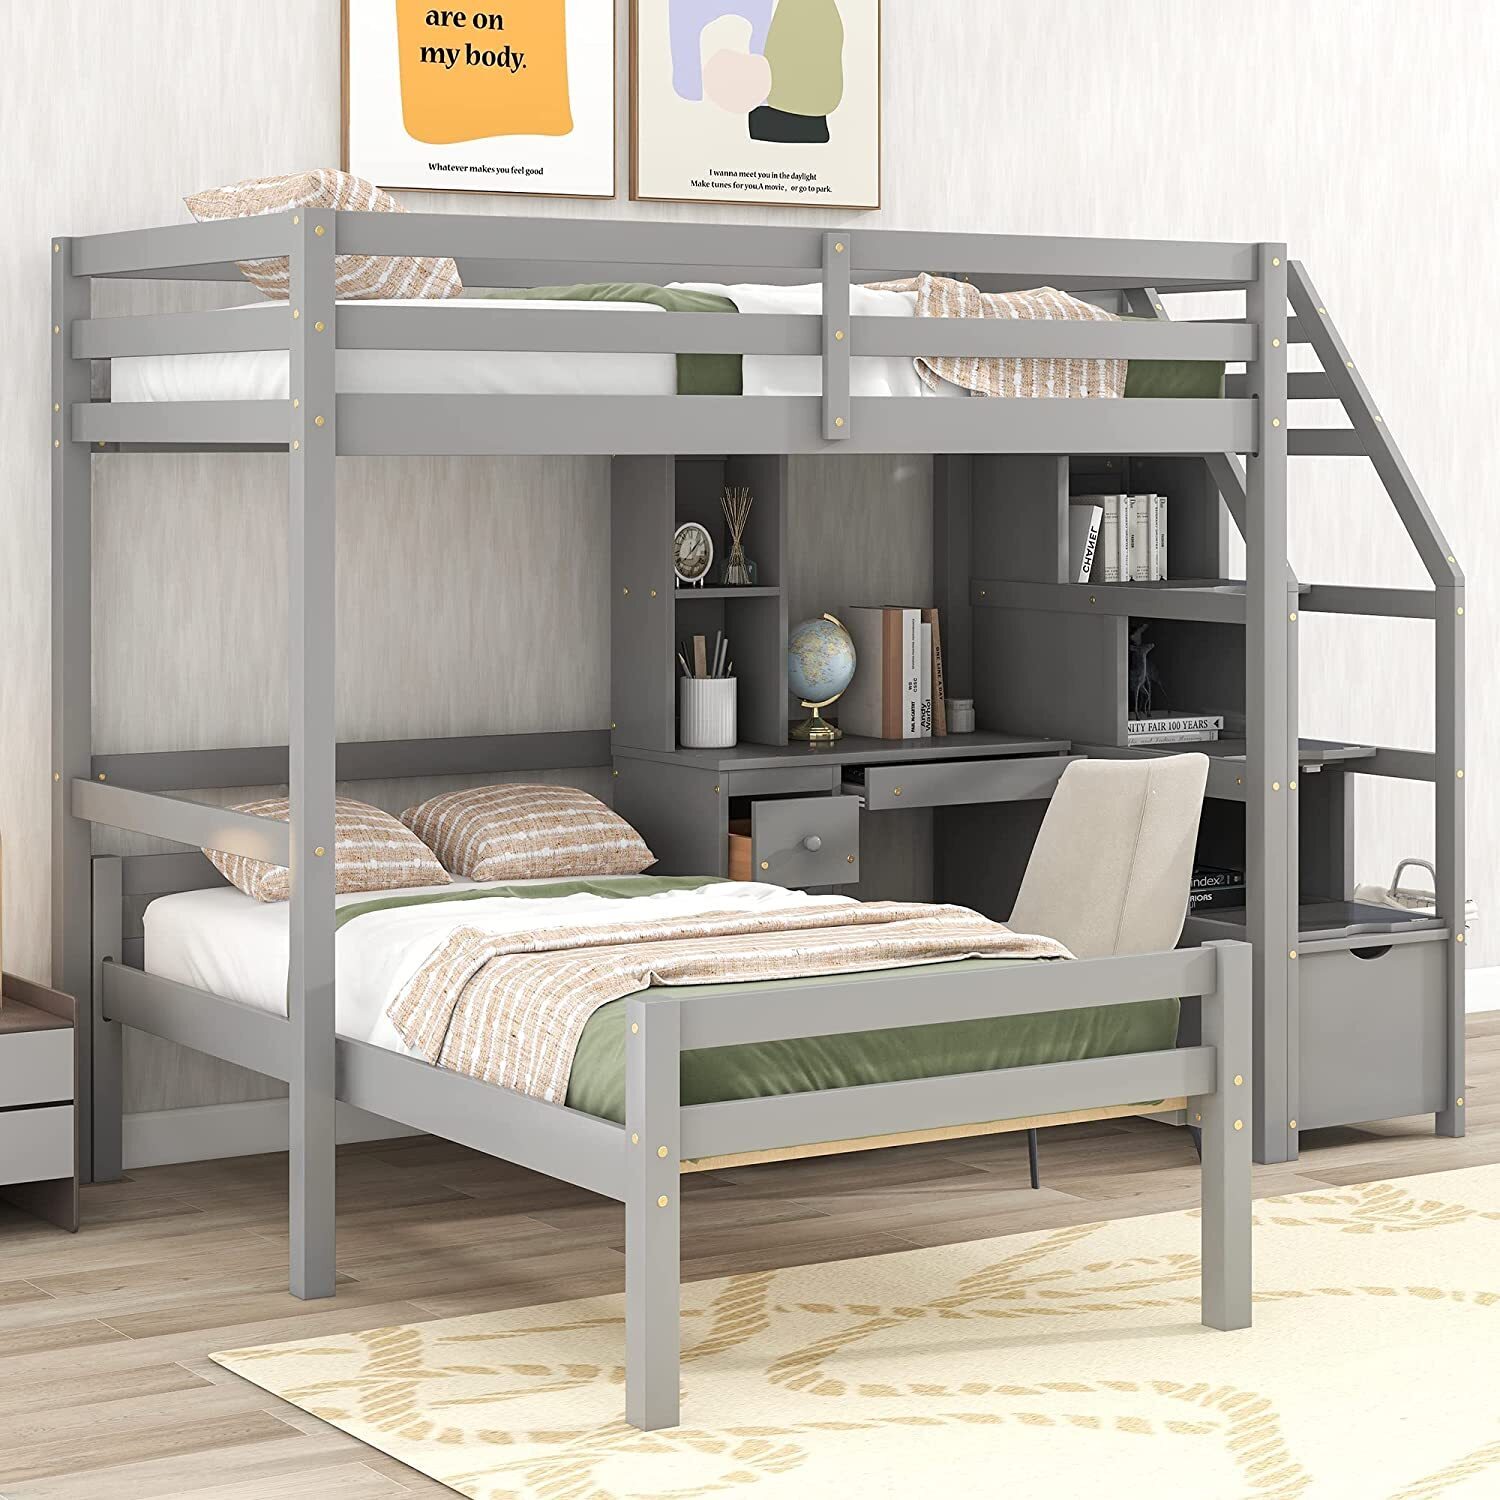 Simple loft bed with futon and desk